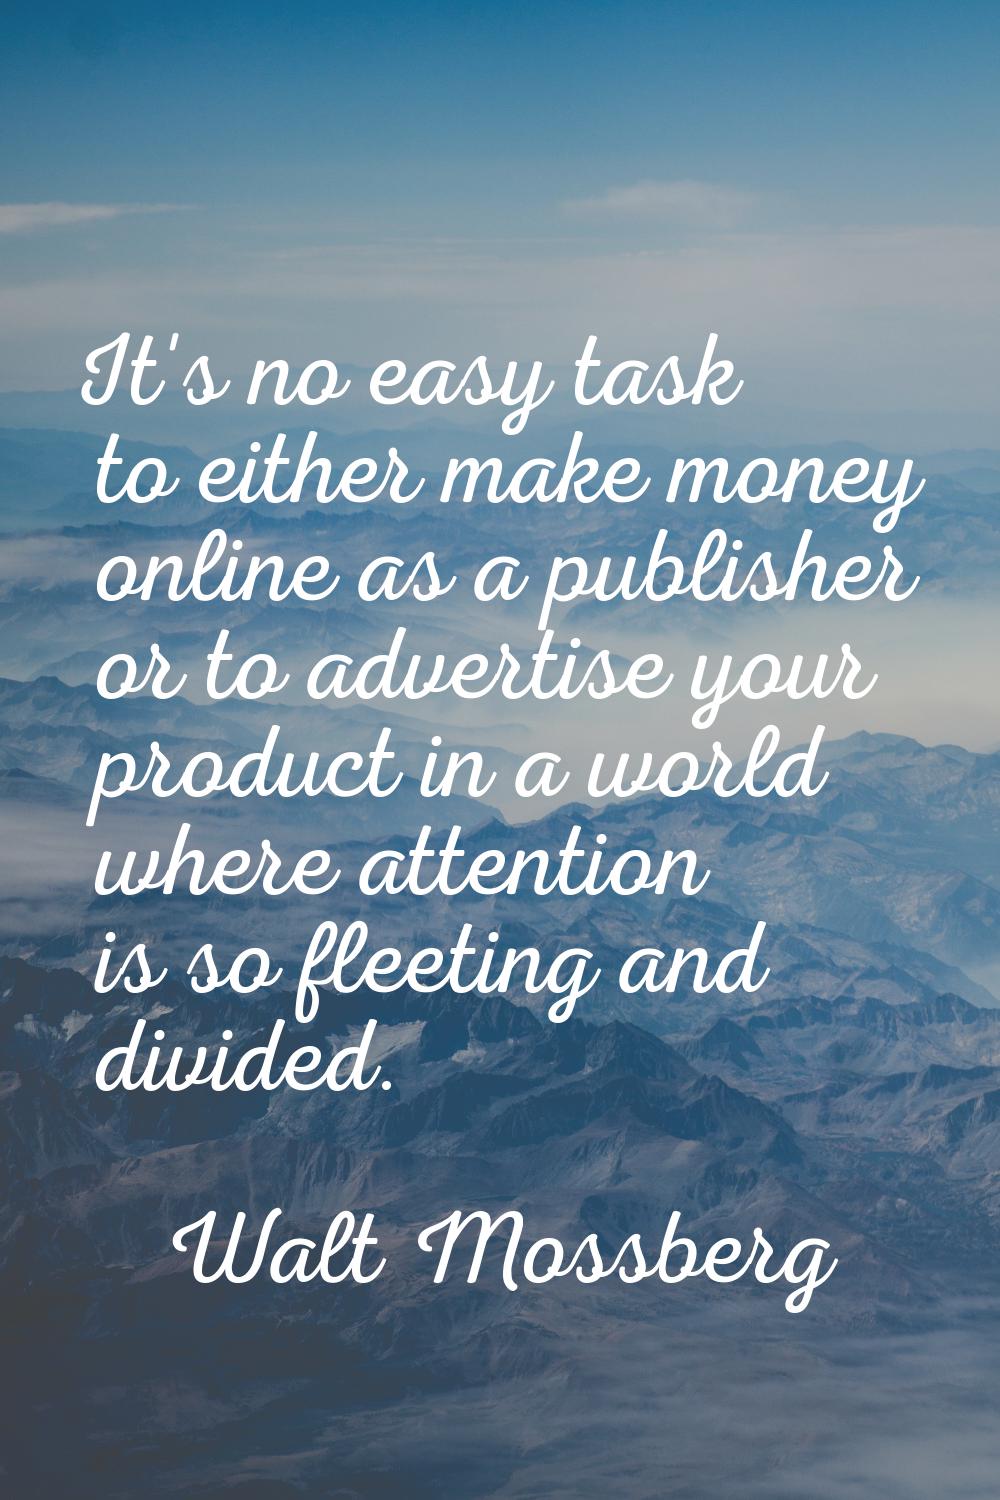 It's no easy task to either make money online as a publisher or to advertise your product in a worl